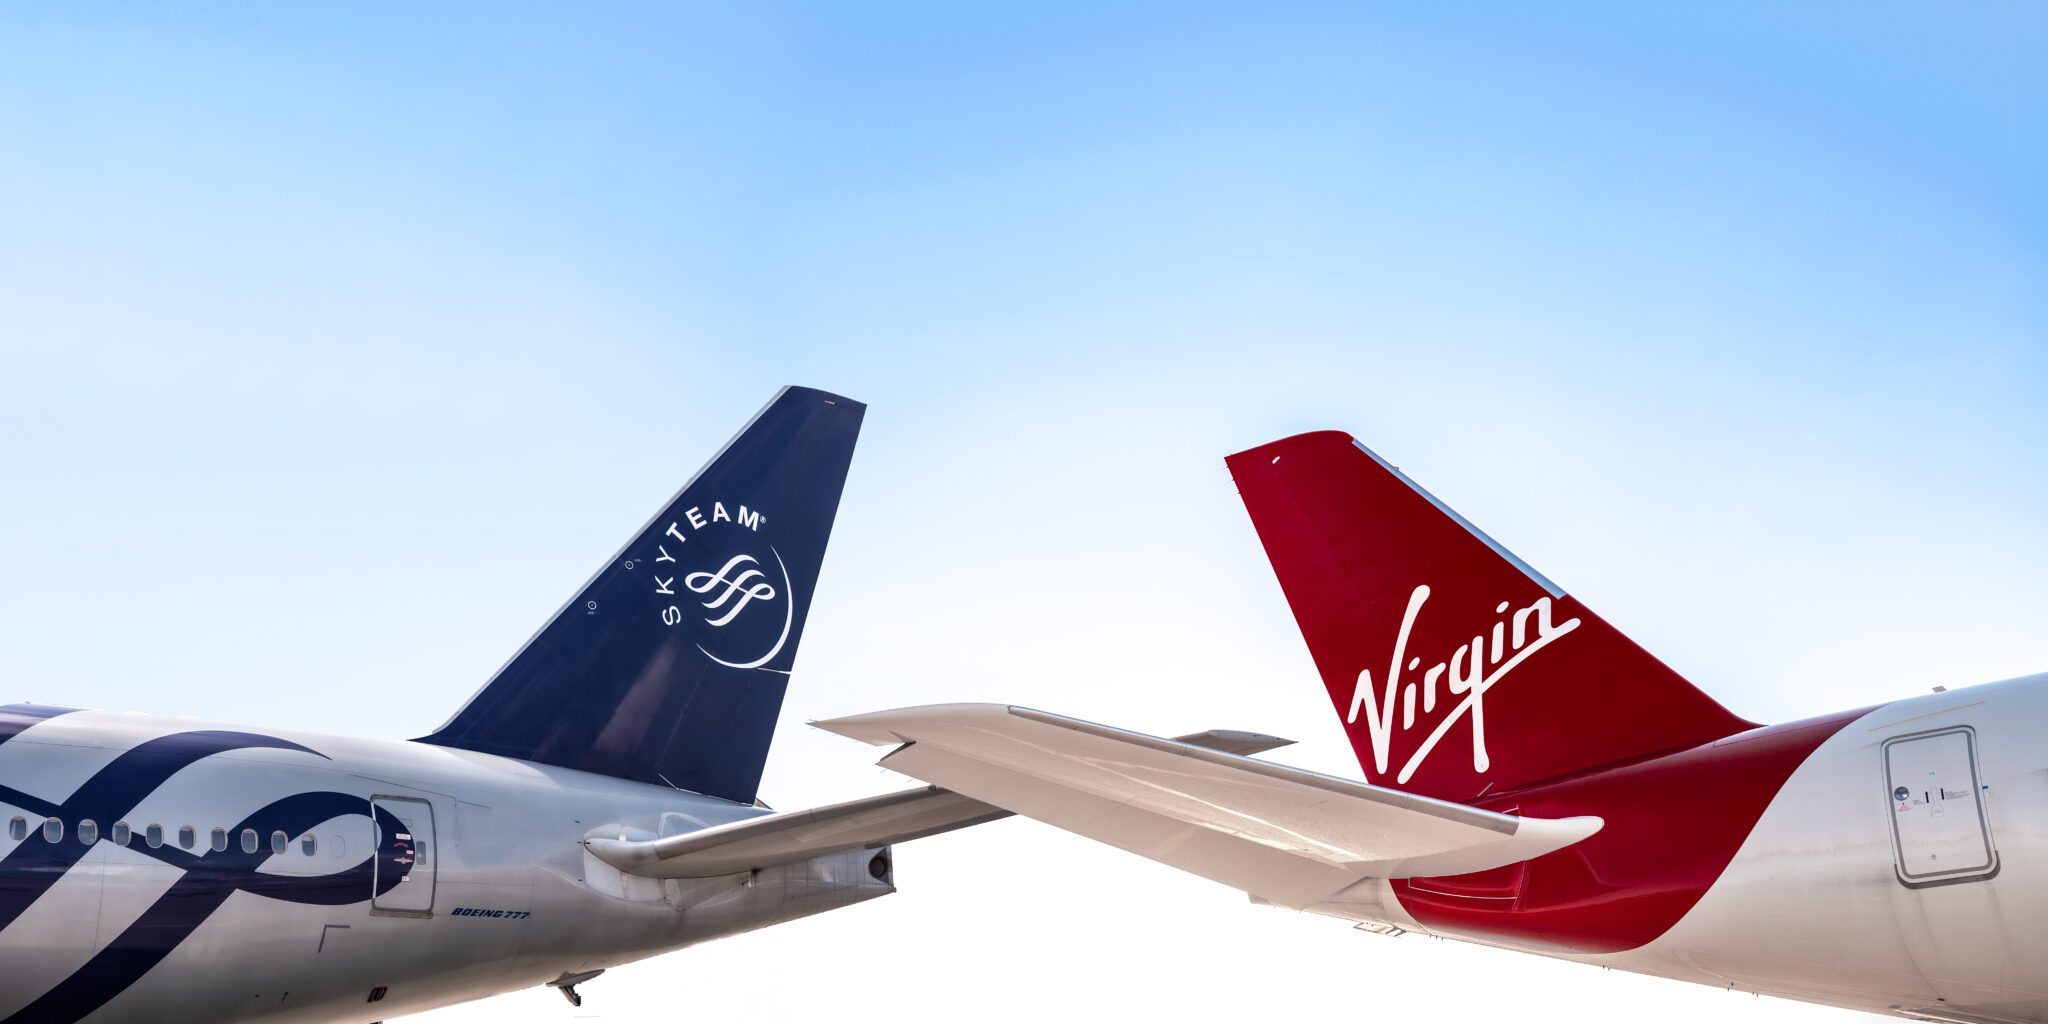 TLFL talks to Virgin Atlantic Flying Club about Skyteam and their future plans